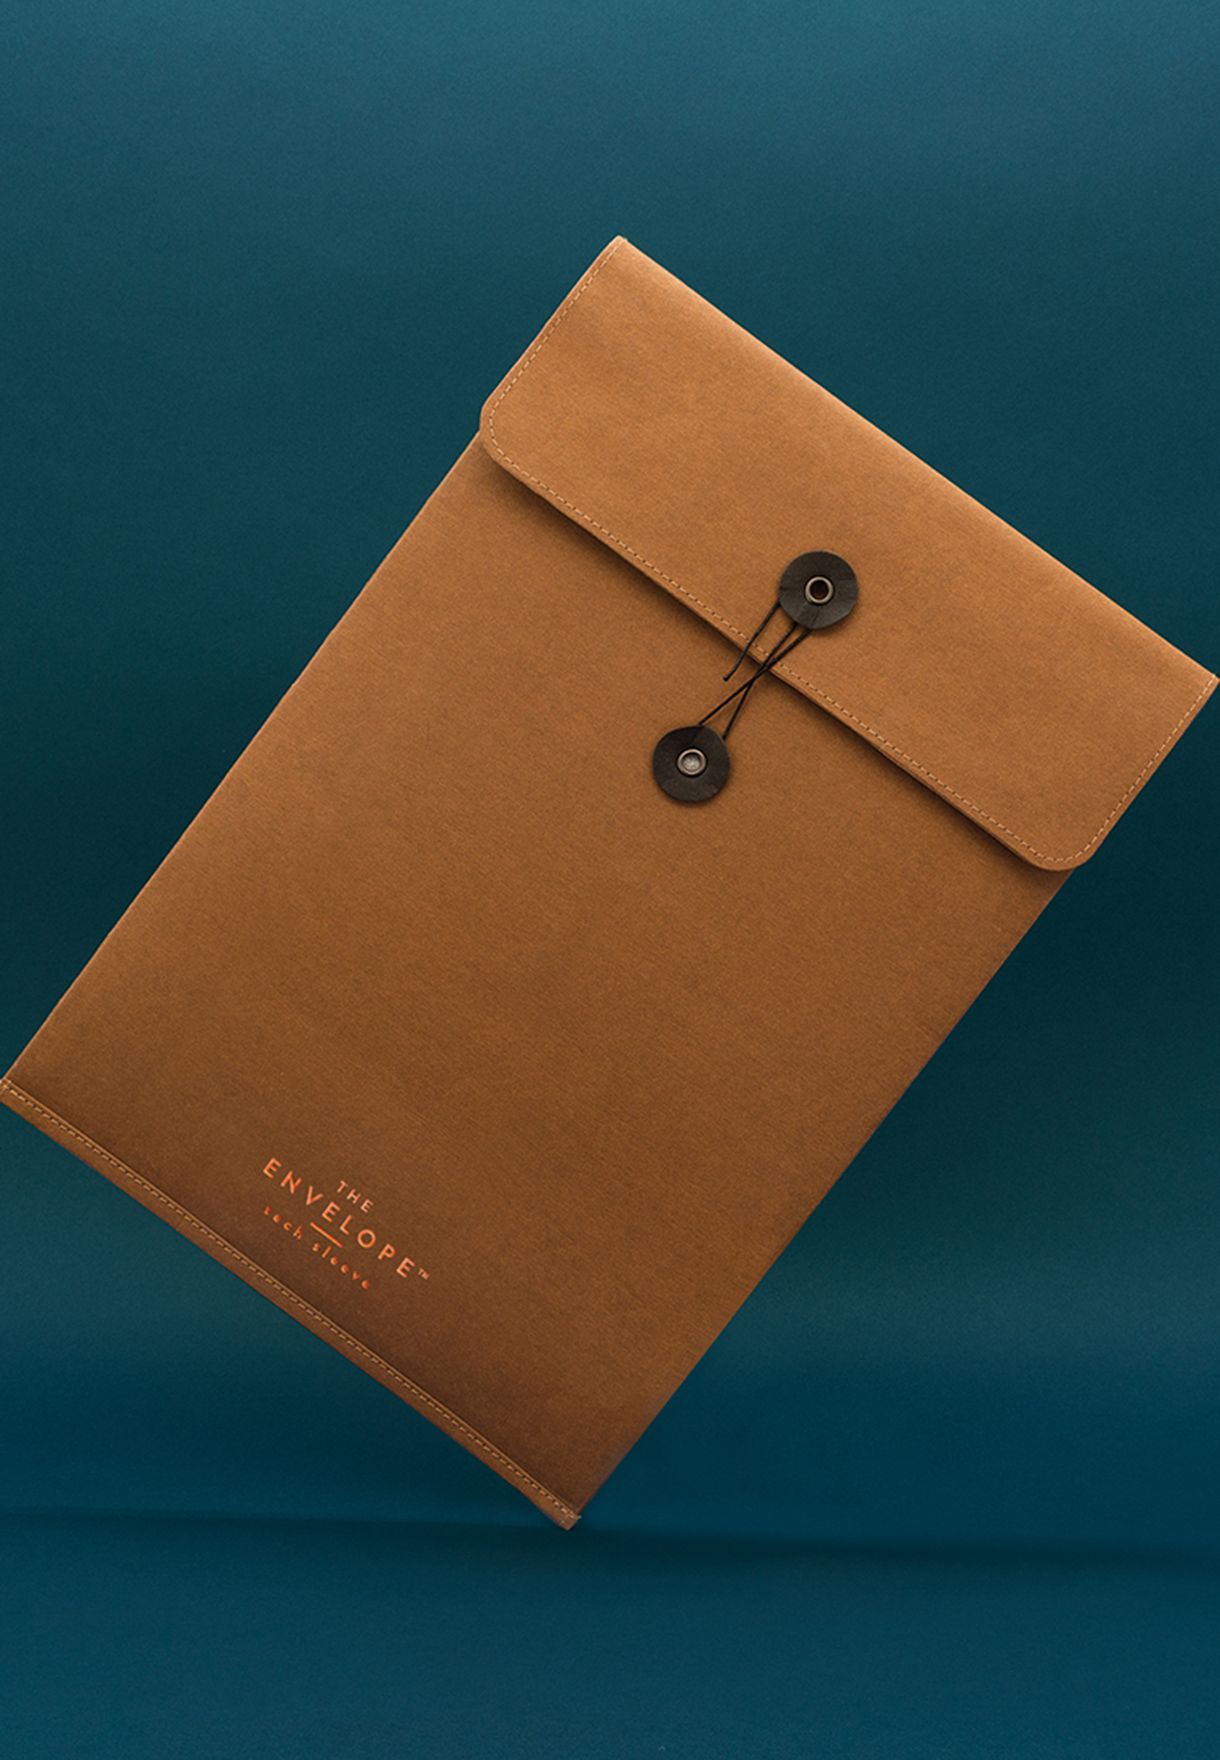 The Envelope Incognito Tech Sleeve